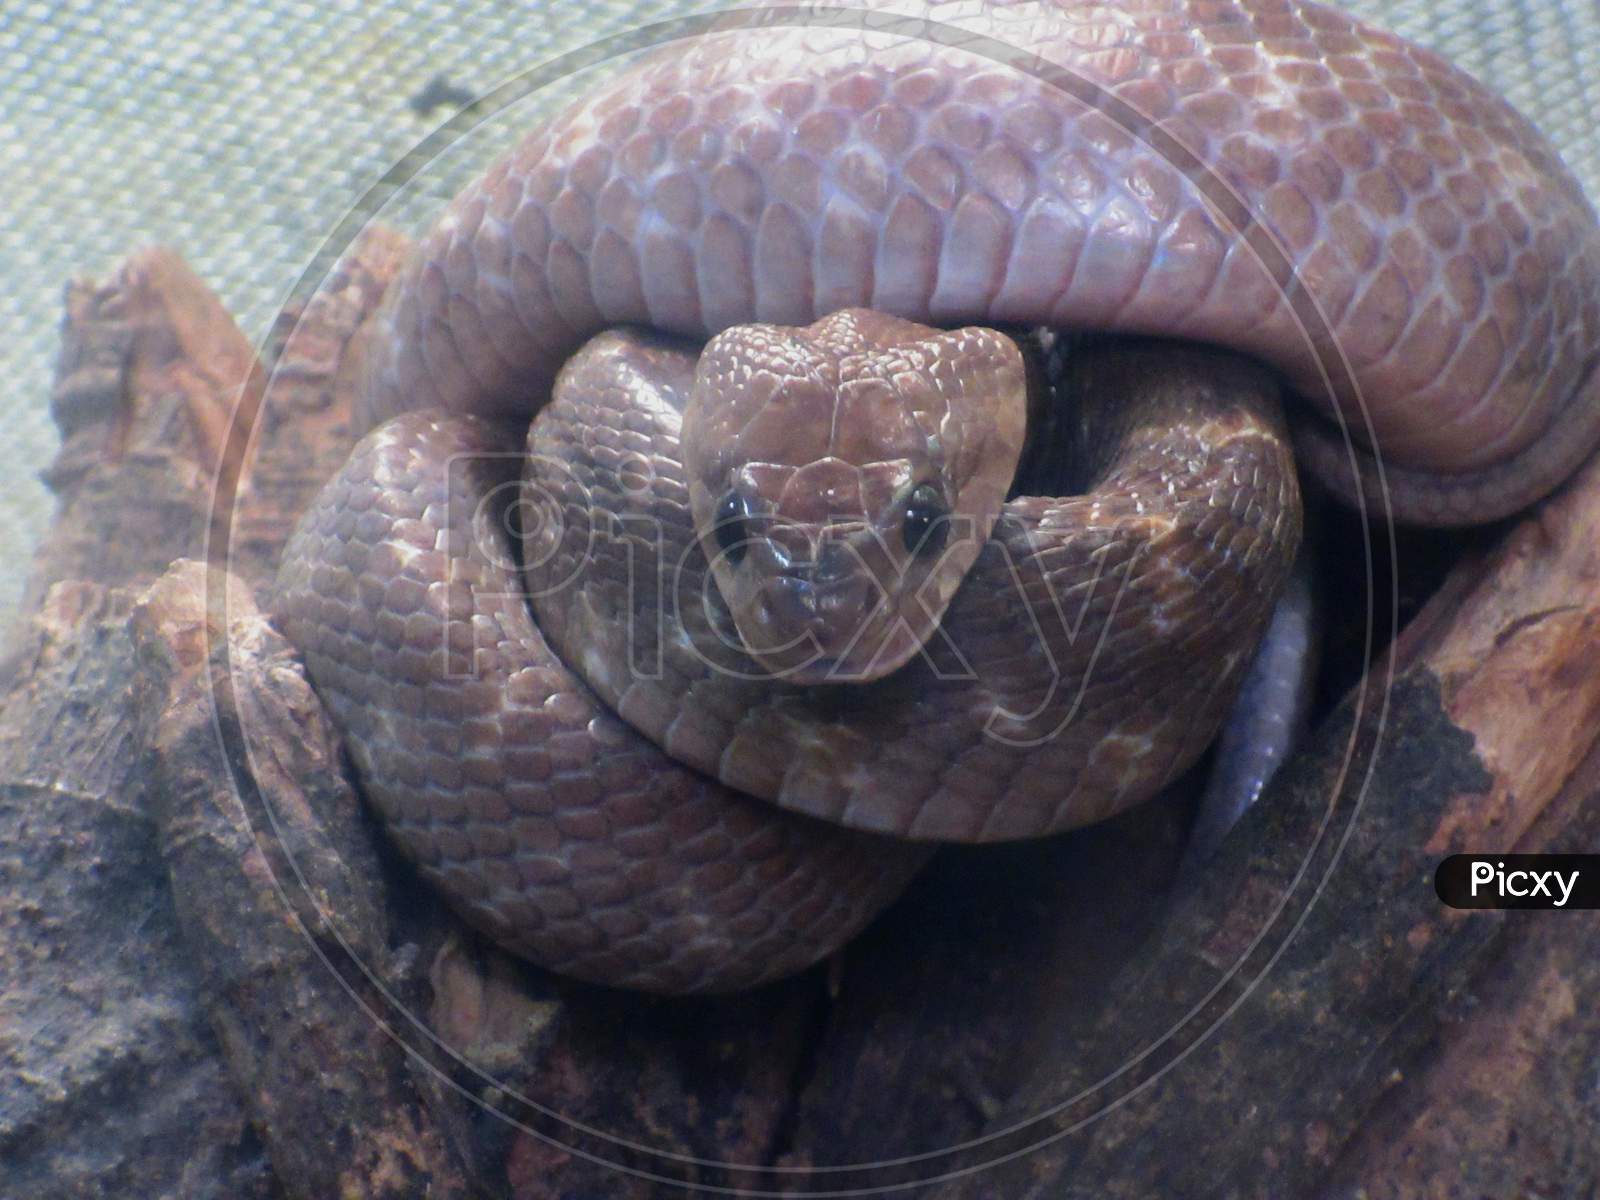 Coiled King Cobra Is A Species Of Venomous Snake Poisonous Snake